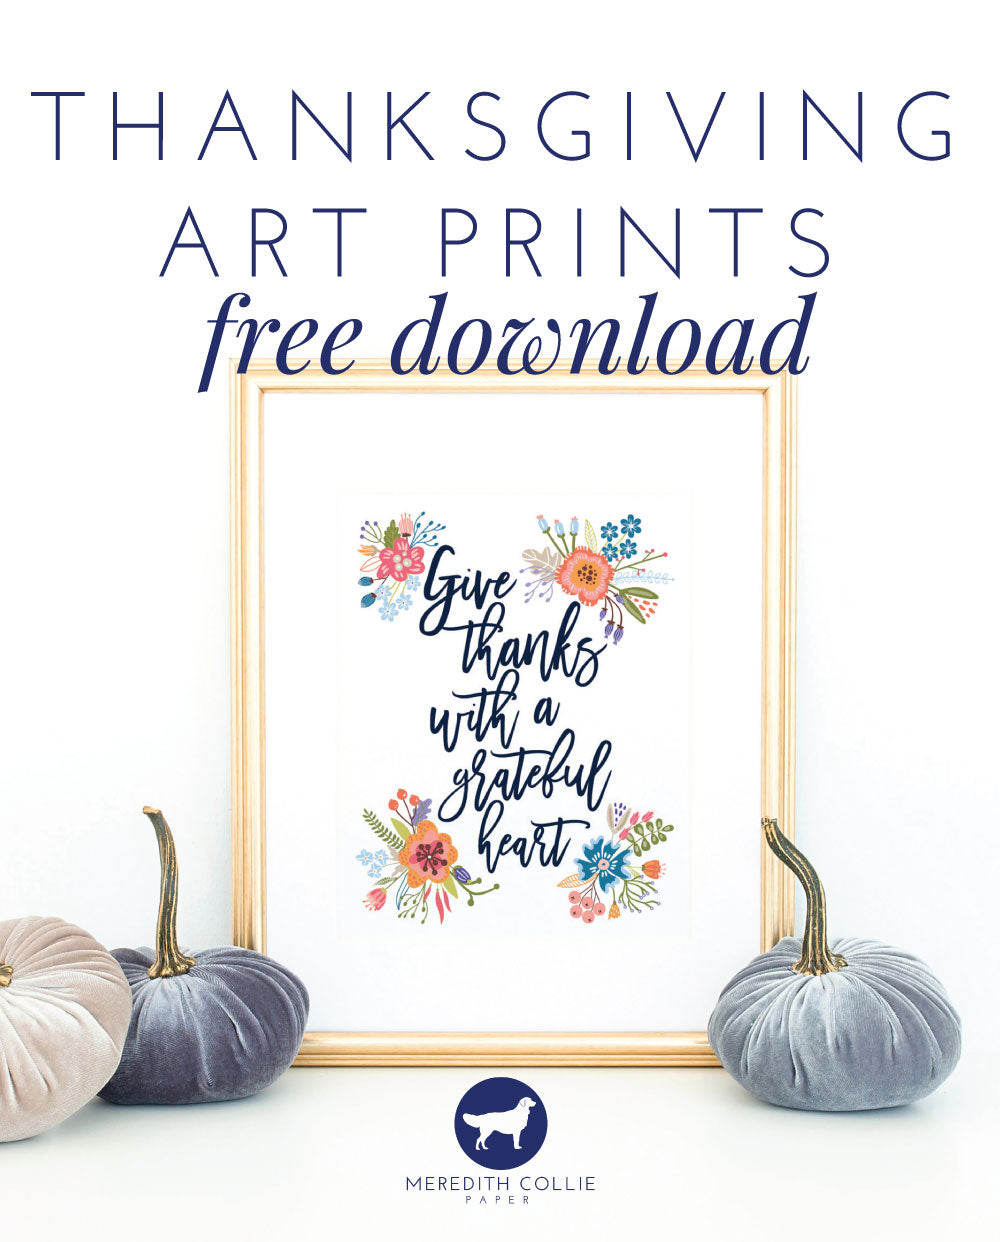 meredith collie paper and design printable thanksgiving